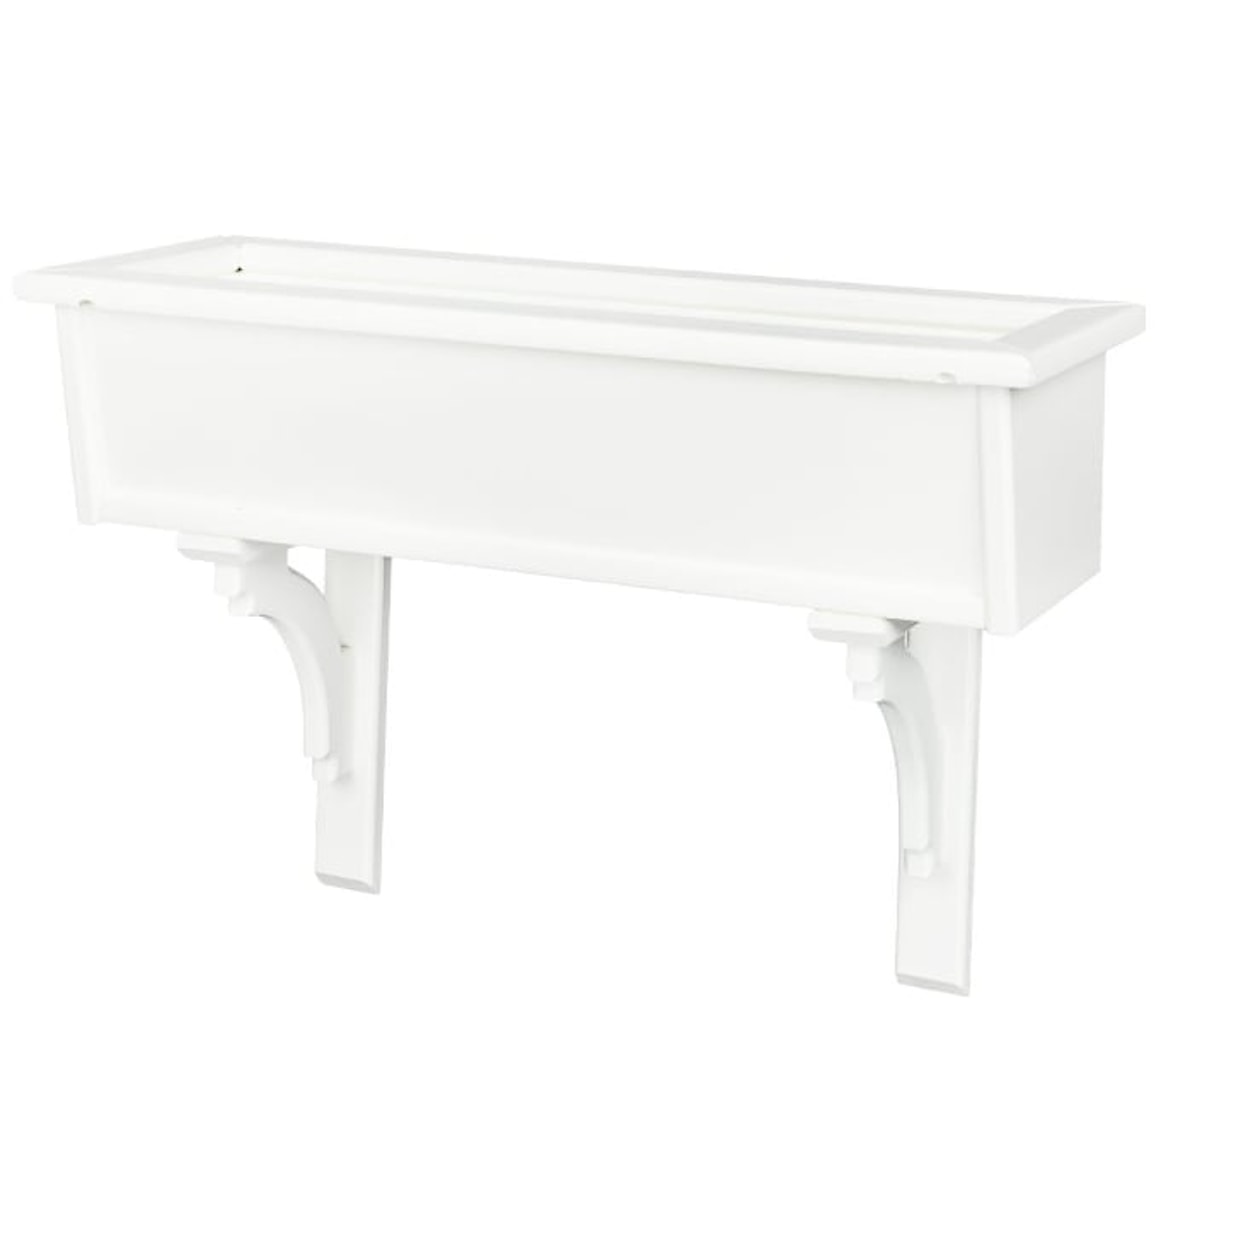 PatioKraft Planters and Benches 24" Window Box